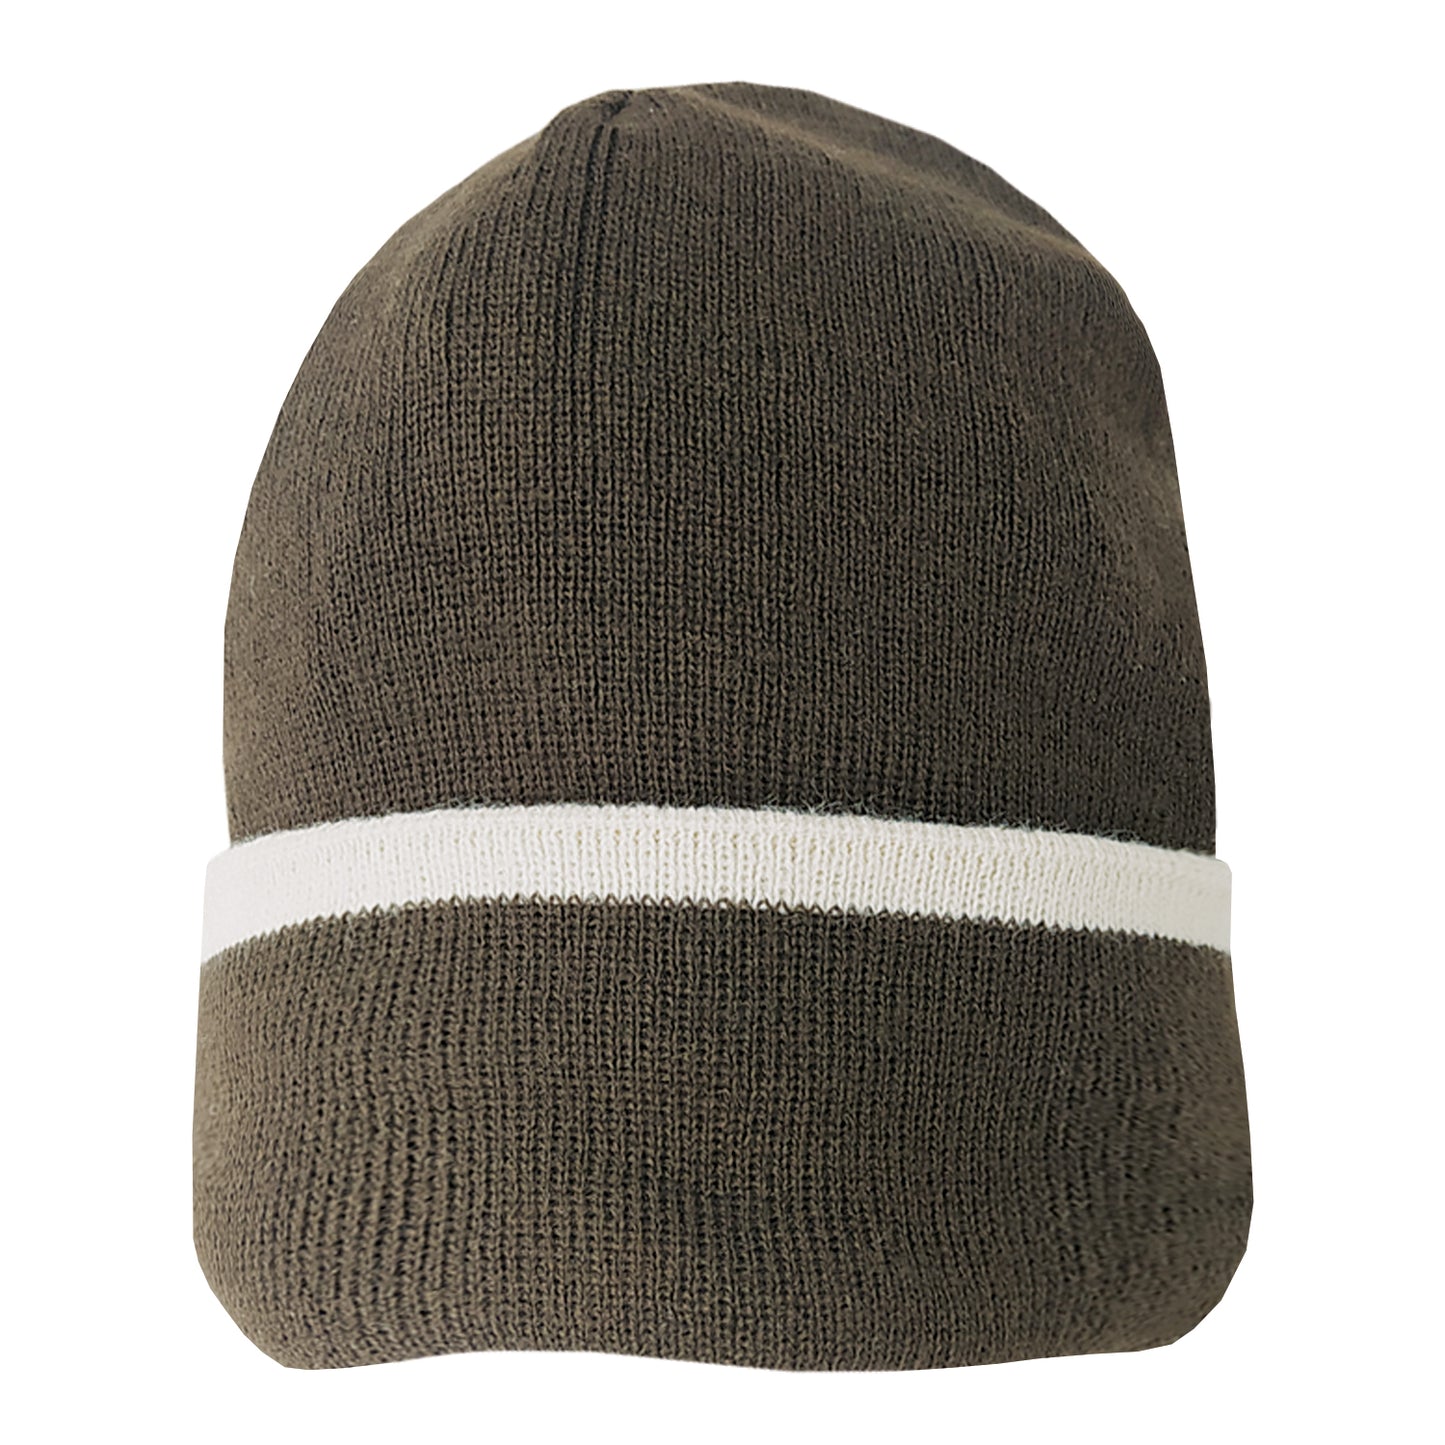 Knitted Brown Hat 111156